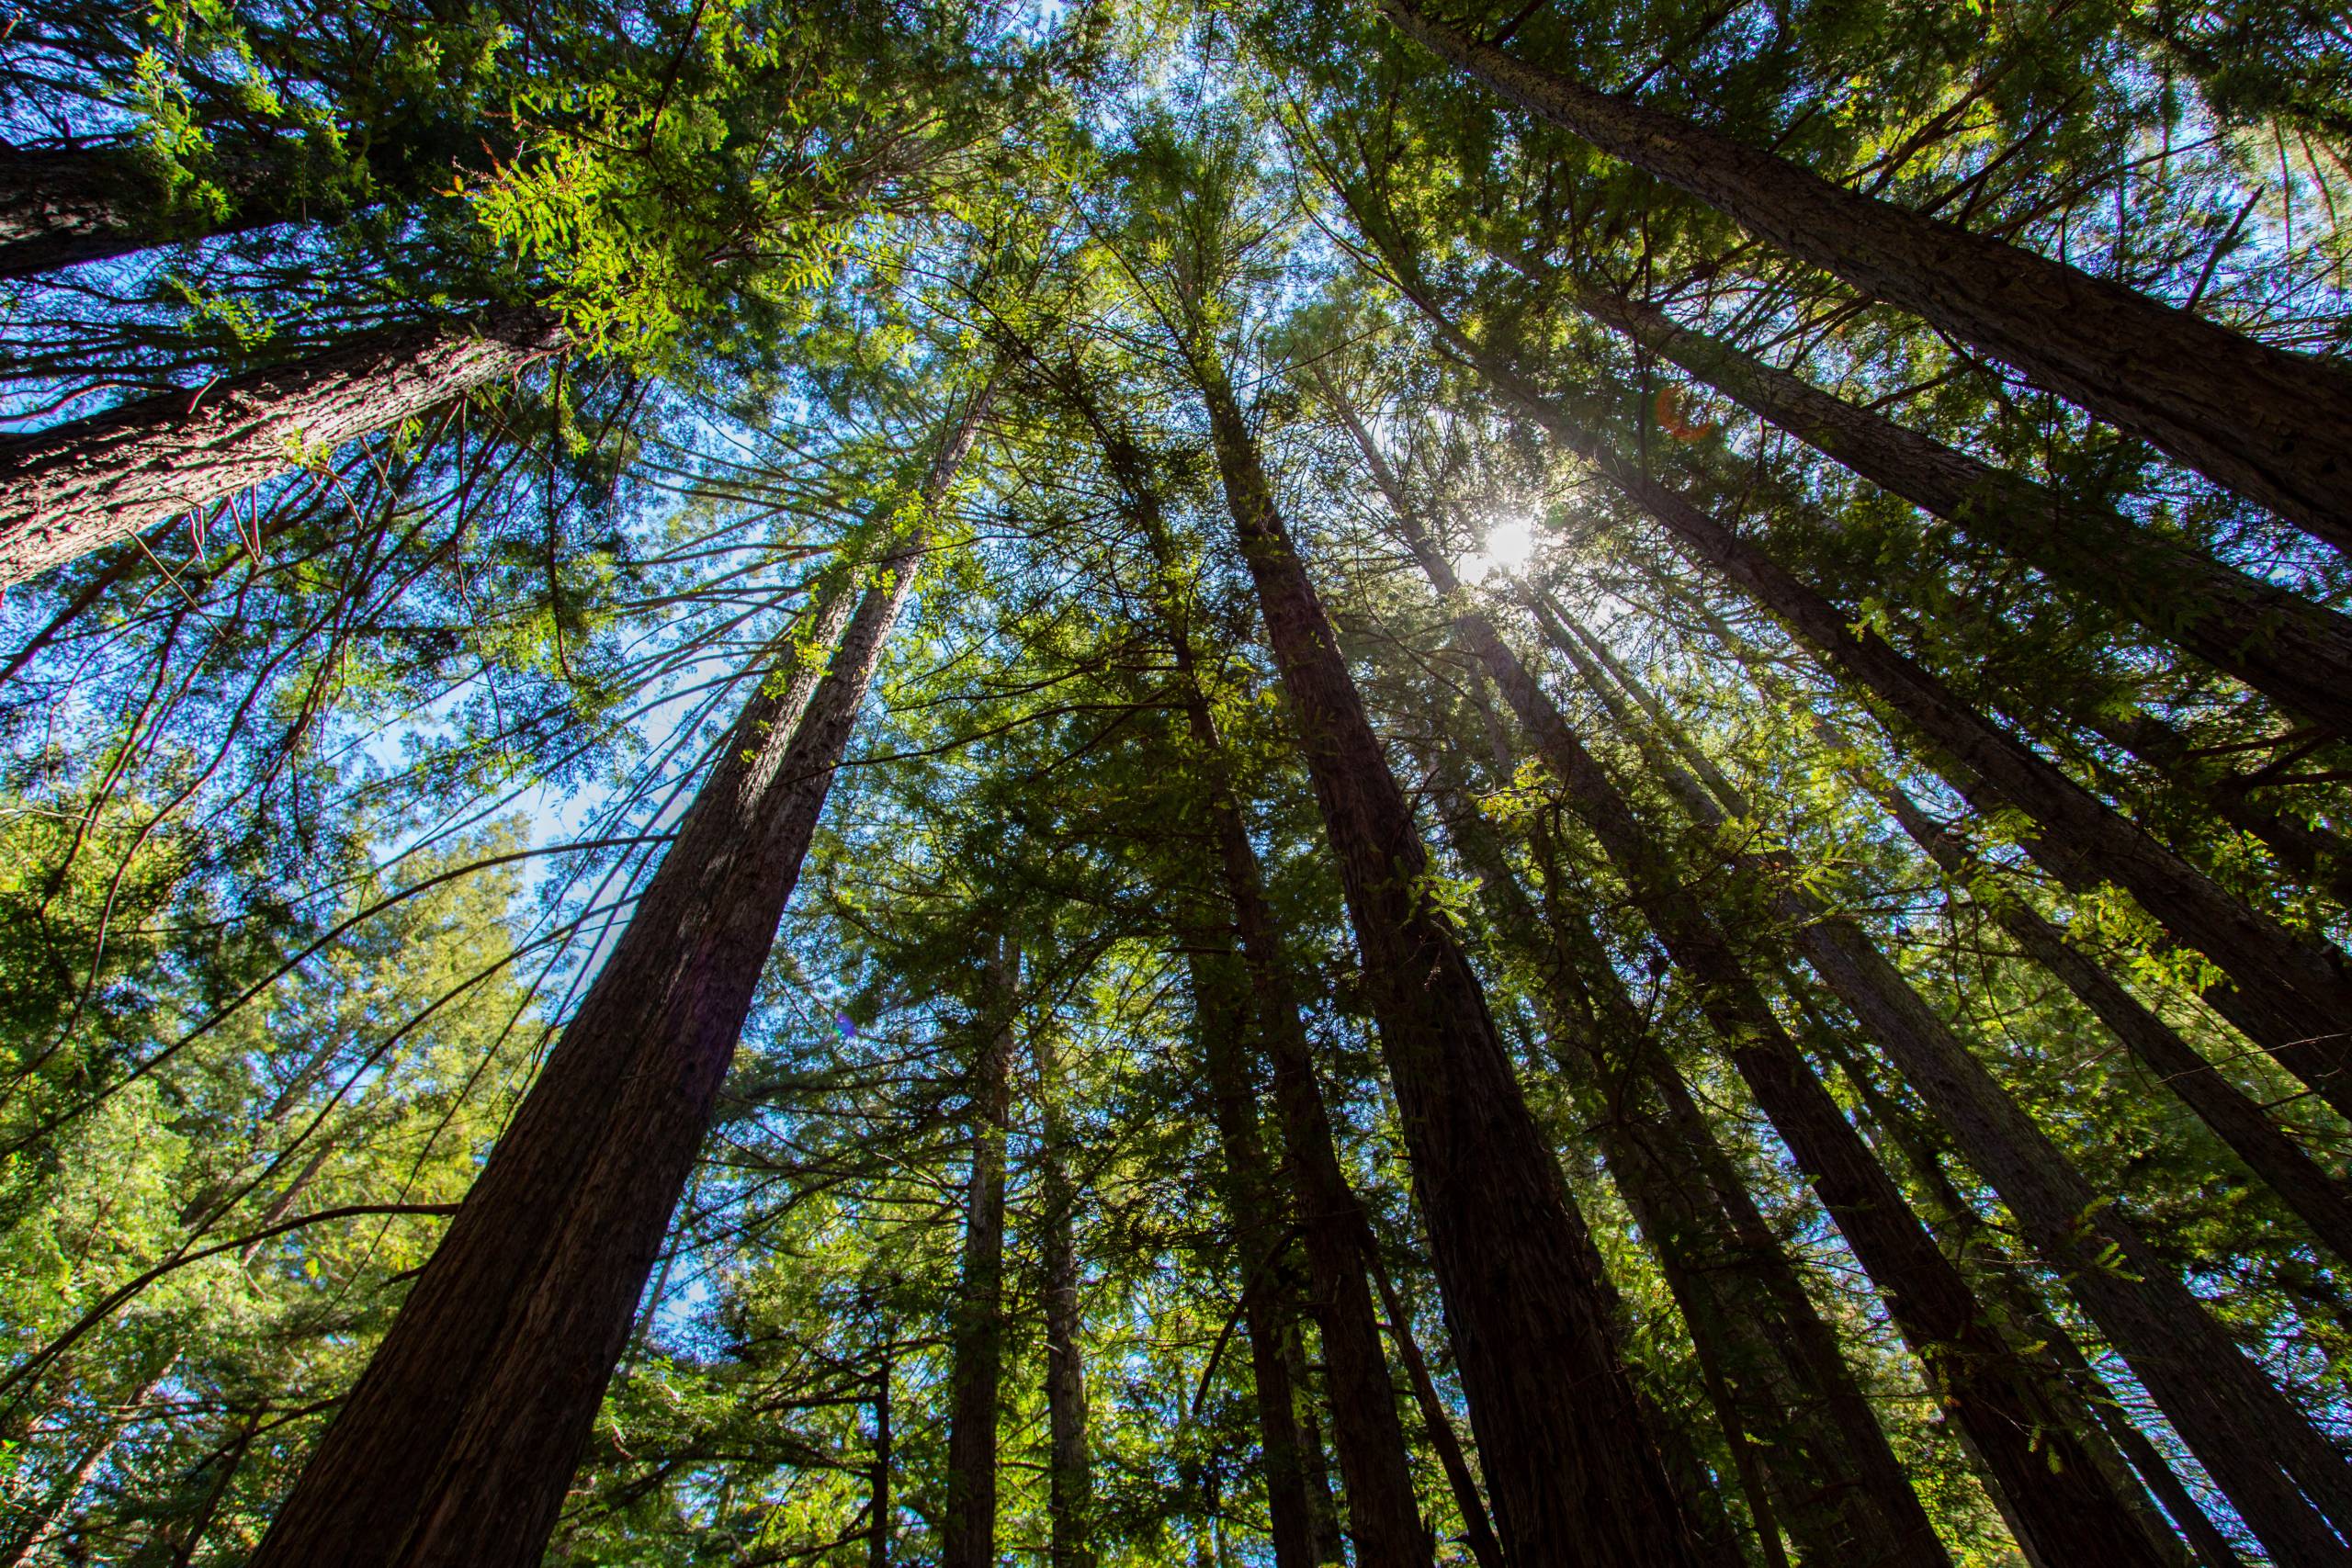 A view of tall redwood trees seen towering above.